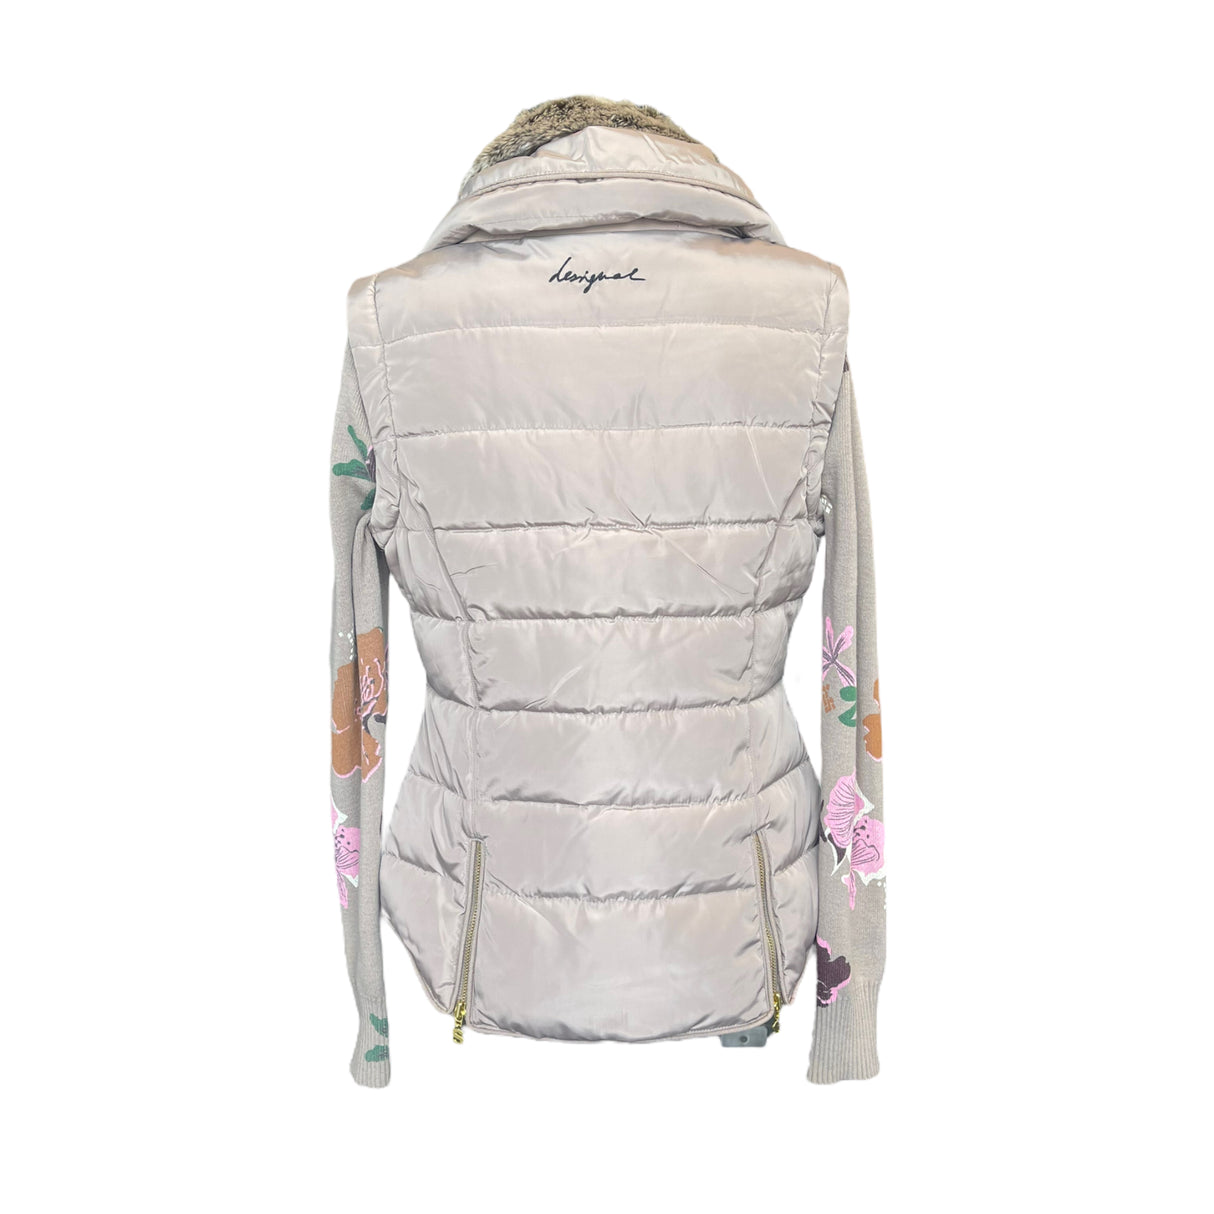 A Second Chance - Desigual 36 Jacket women BRANDNEW - Delivery All Over Lebanon